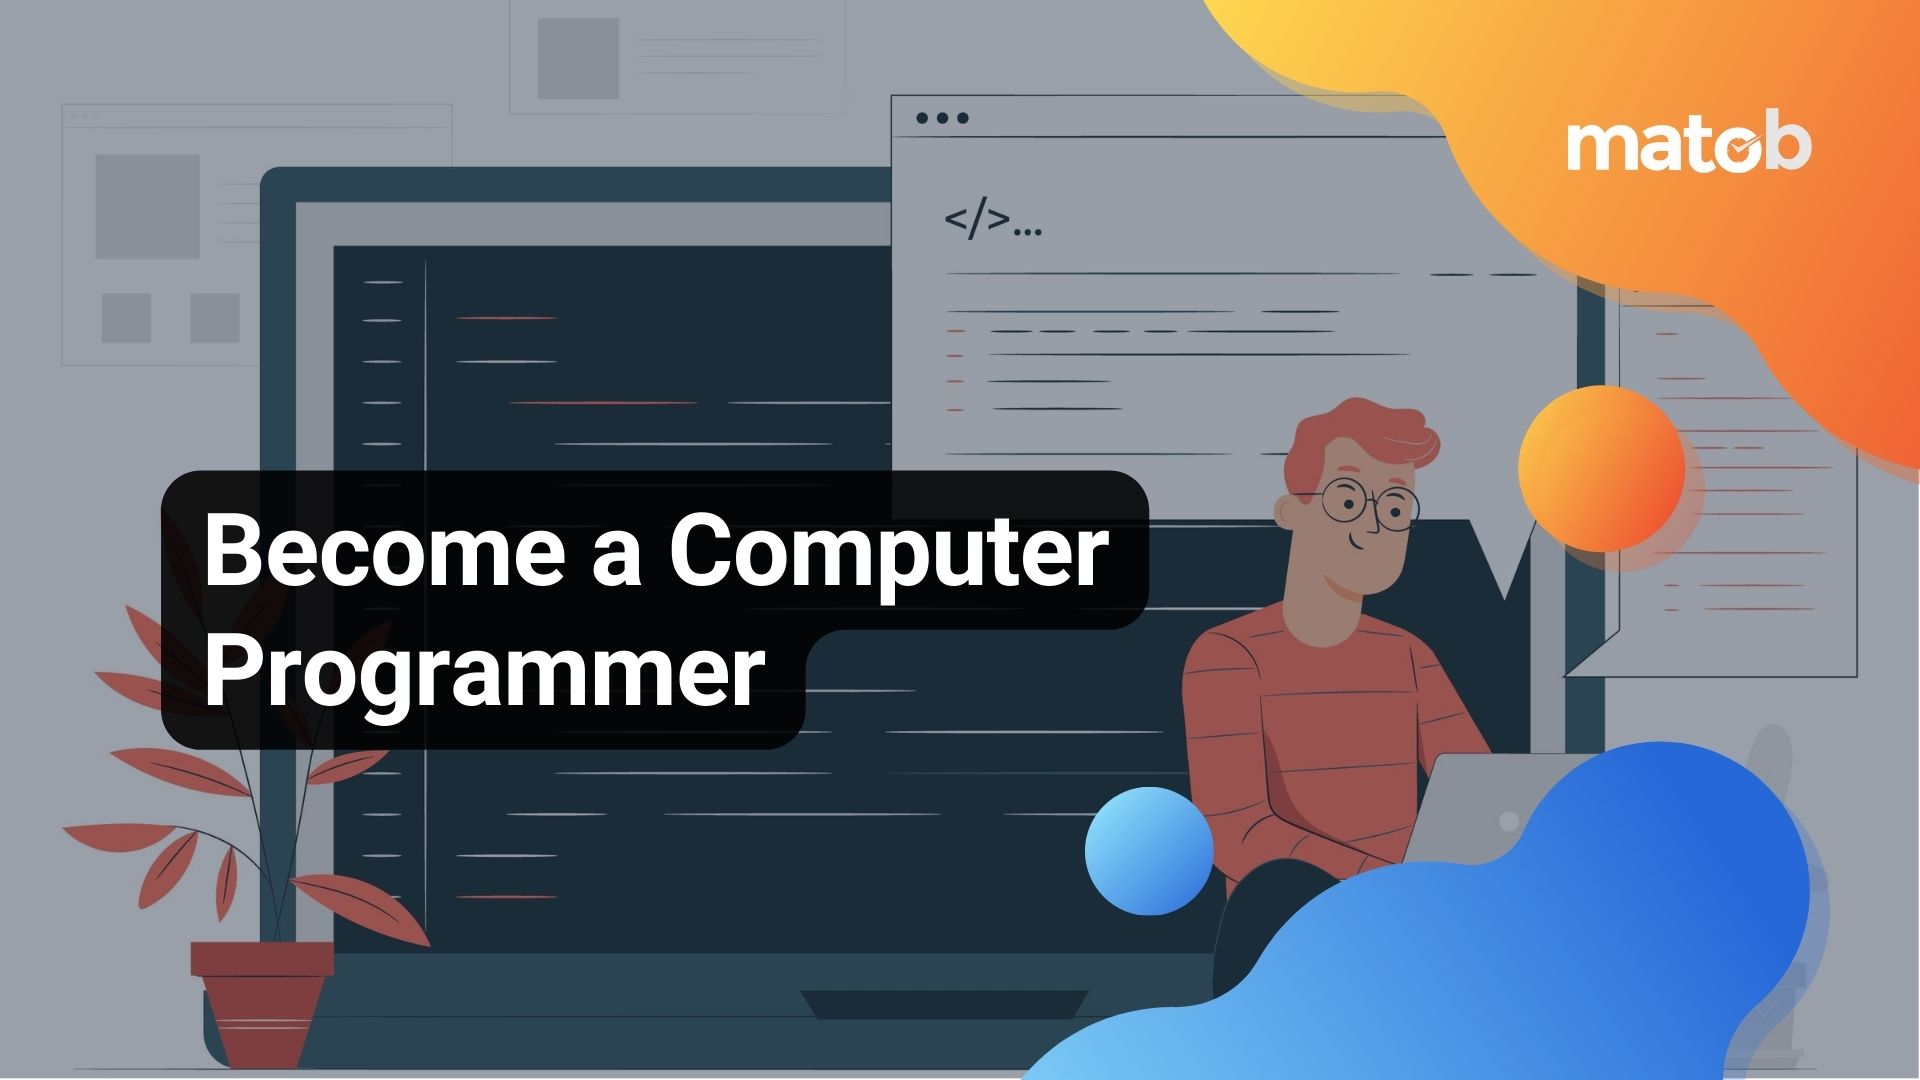 Roadmap-To-Become-a-Computer-Programmer